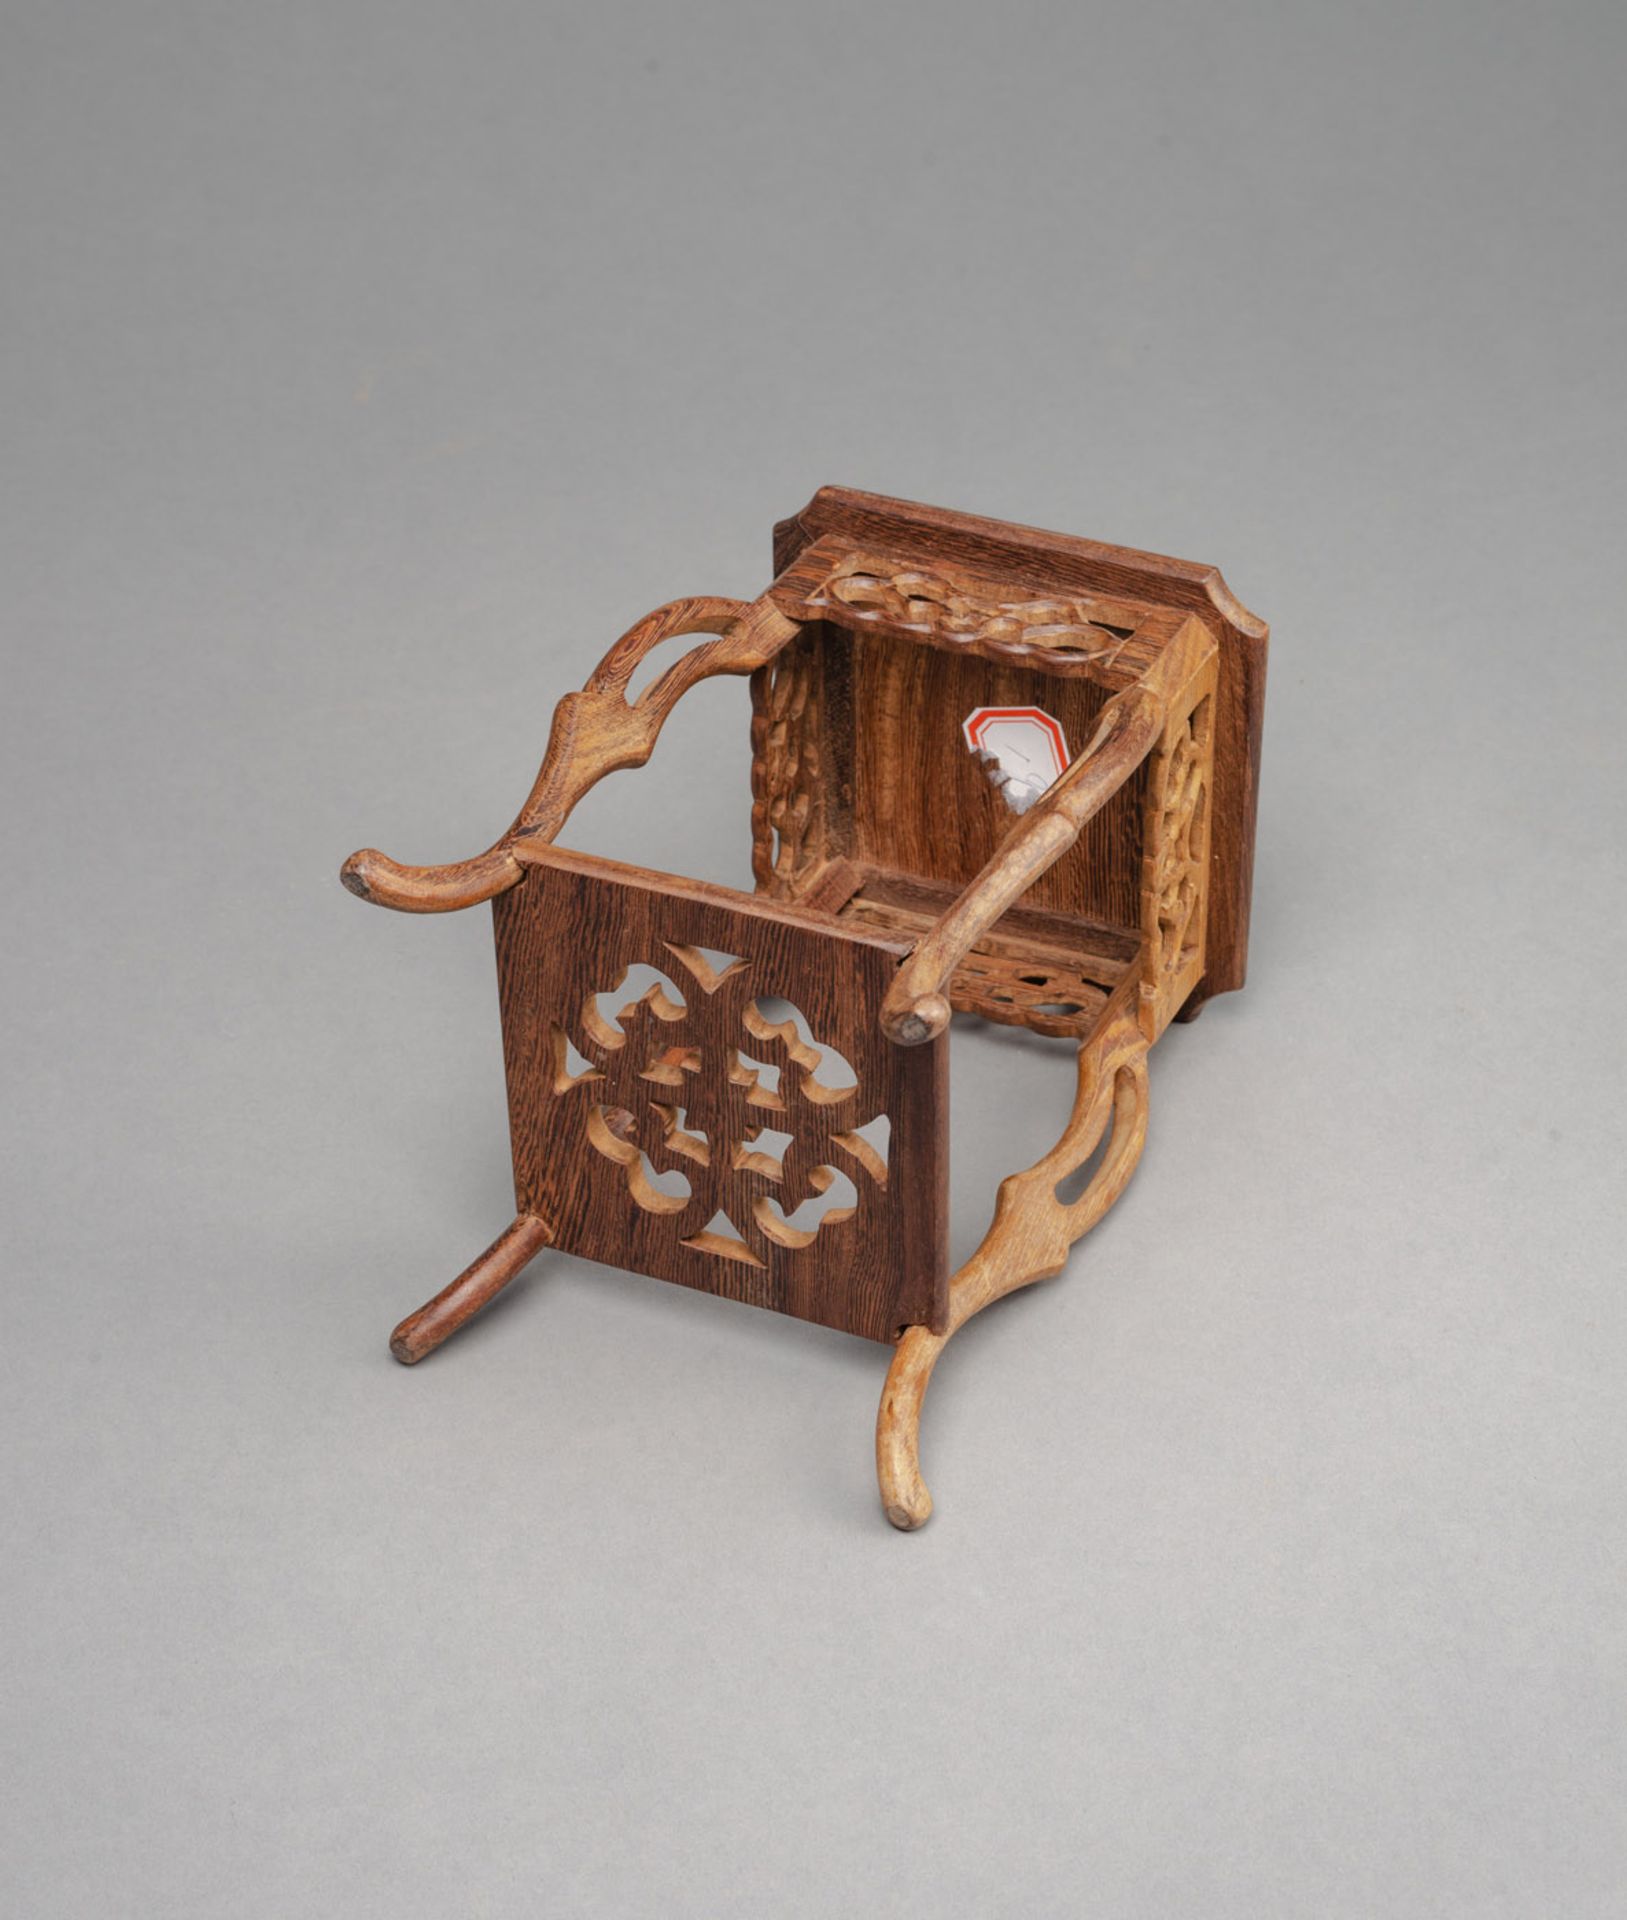 A SMALL SQUARE WOOD VASE STAND - Image 3 of 4